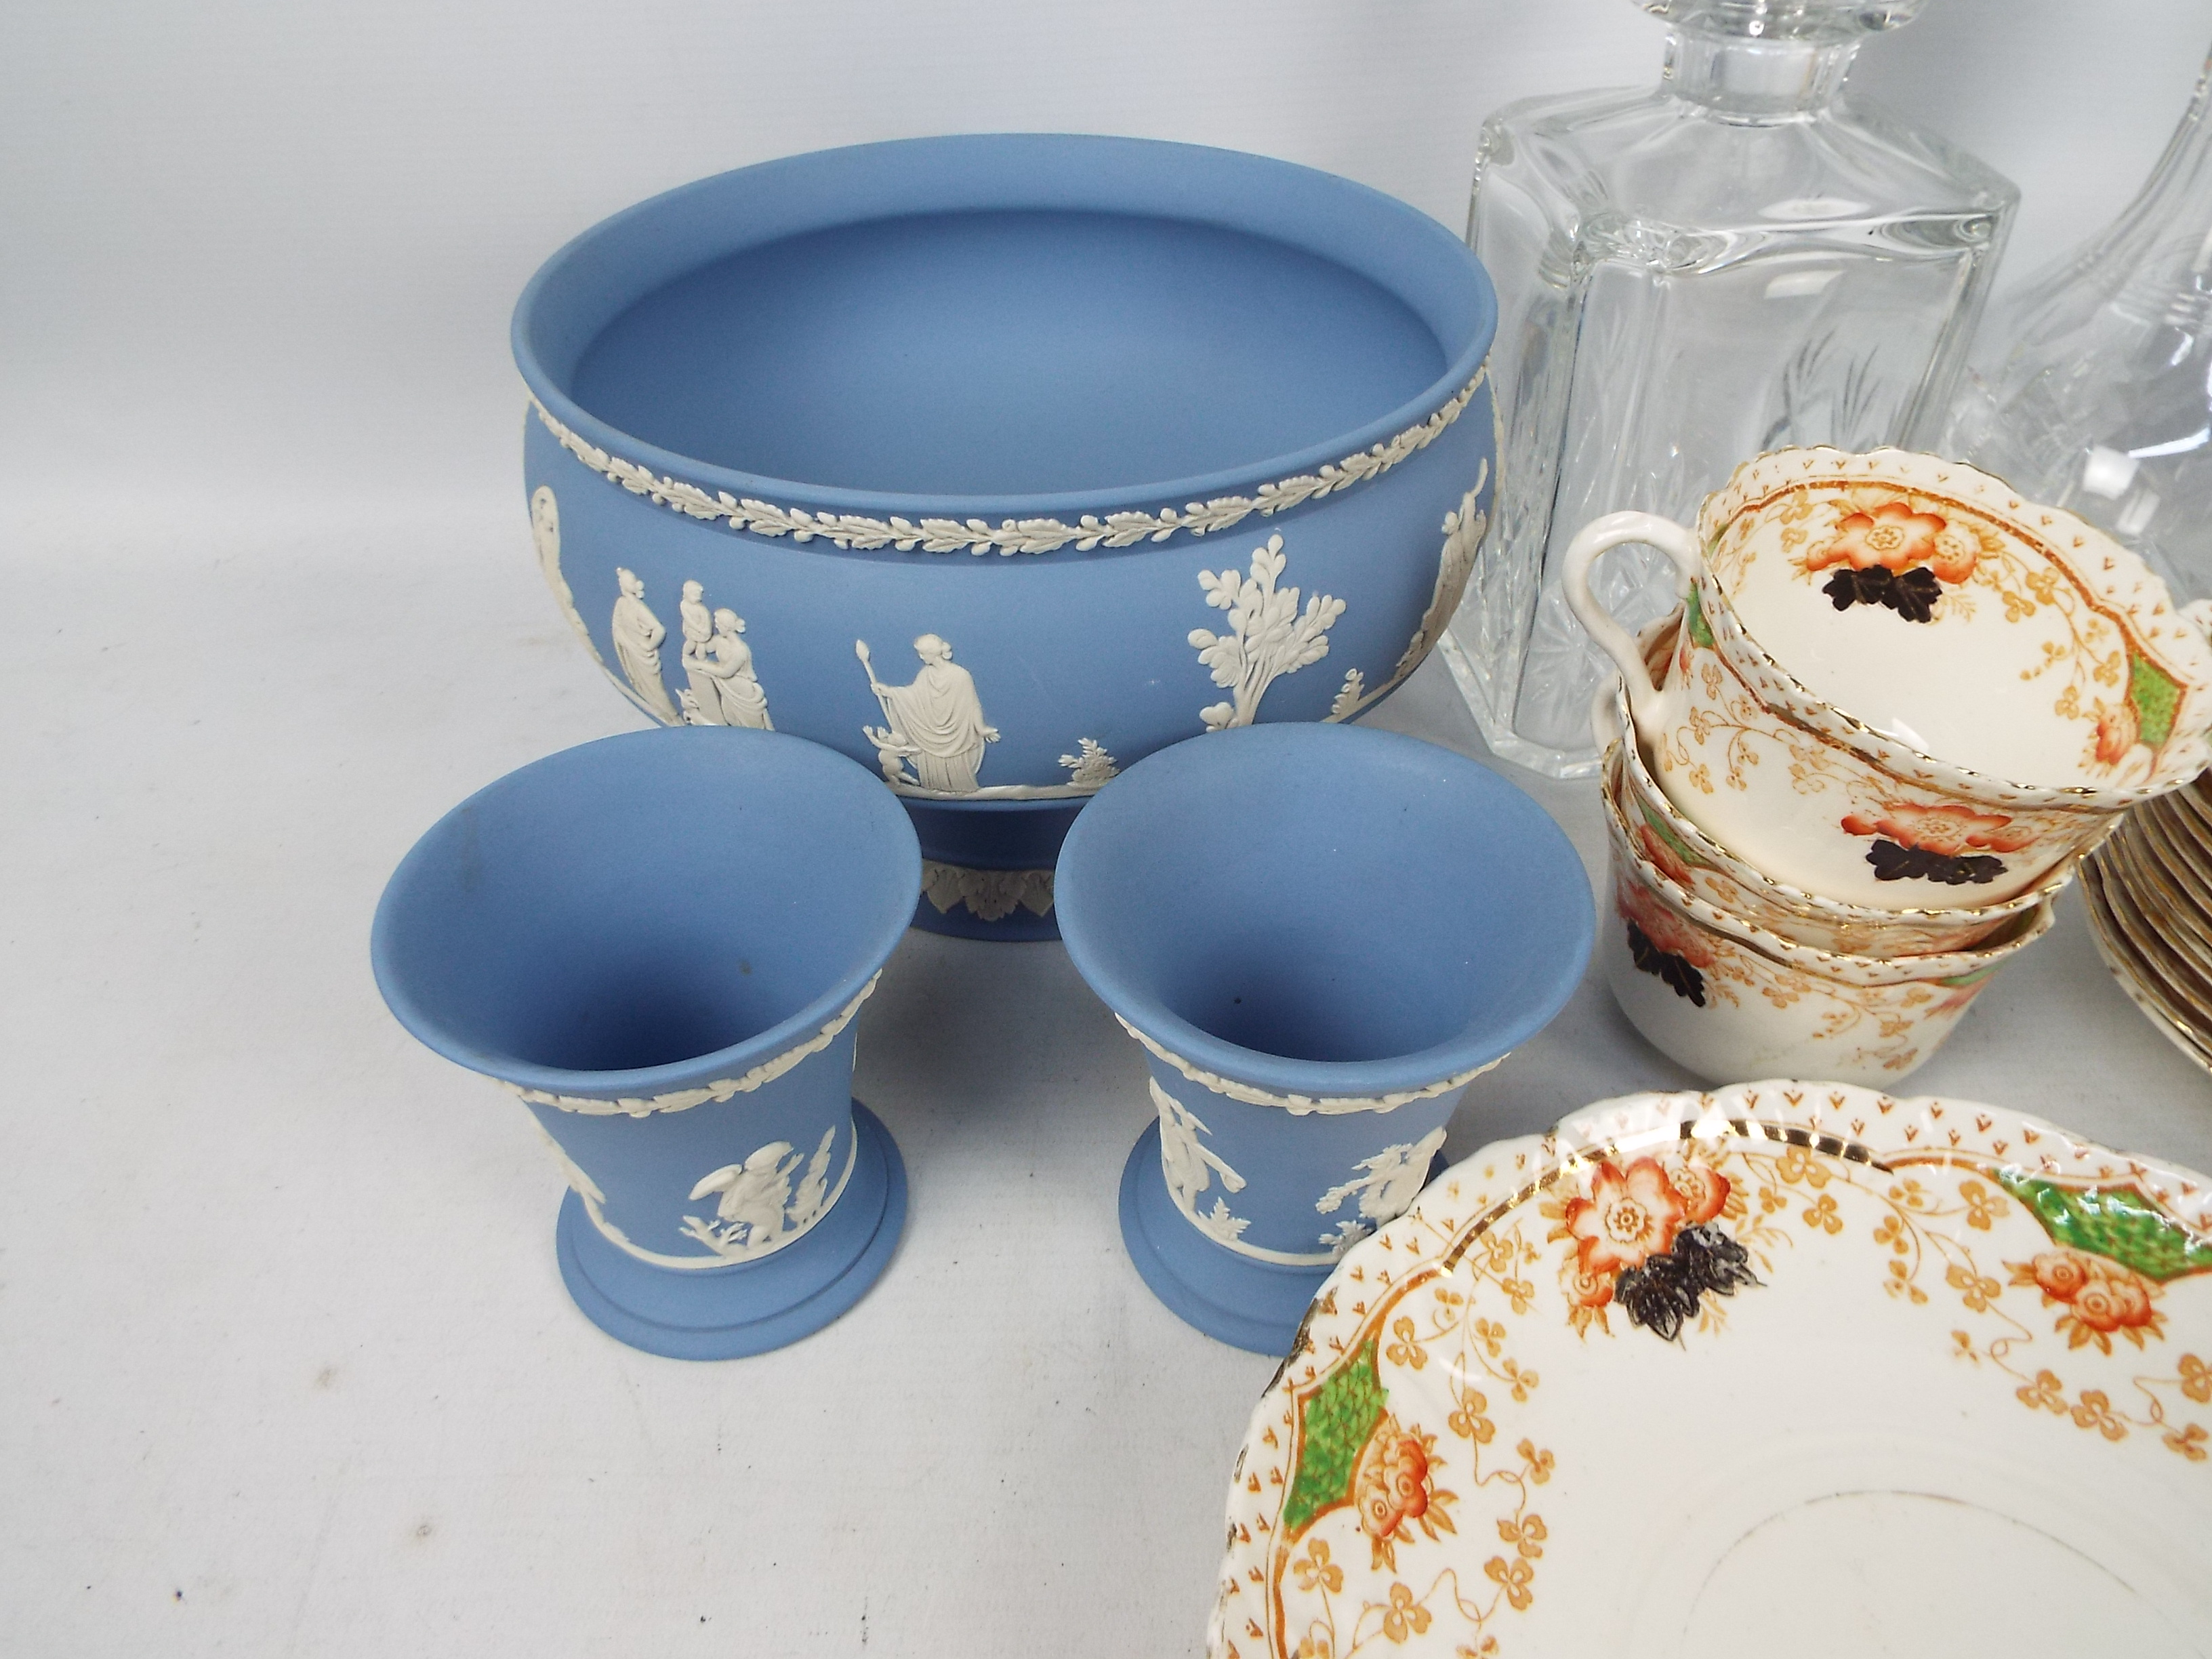 Lot to include a Wedgwood Jasperware pedestal fruit bowl and pair of vases, - Image 2 of 4